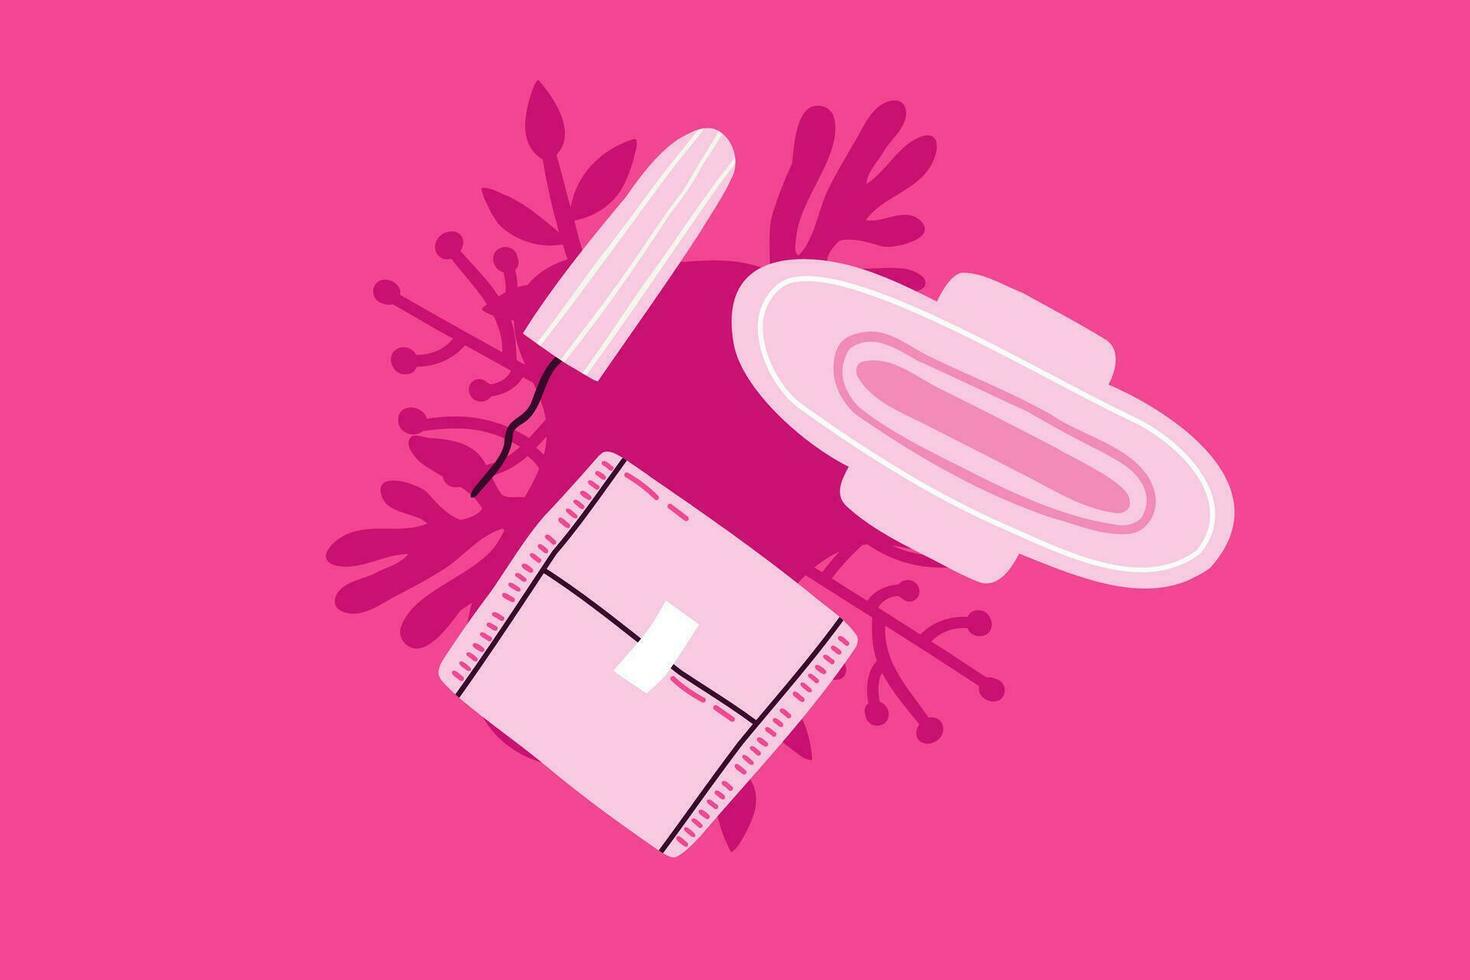 Means of personal hygiene during menstruation. Gasket, tampon. Vector illustration in flat style.